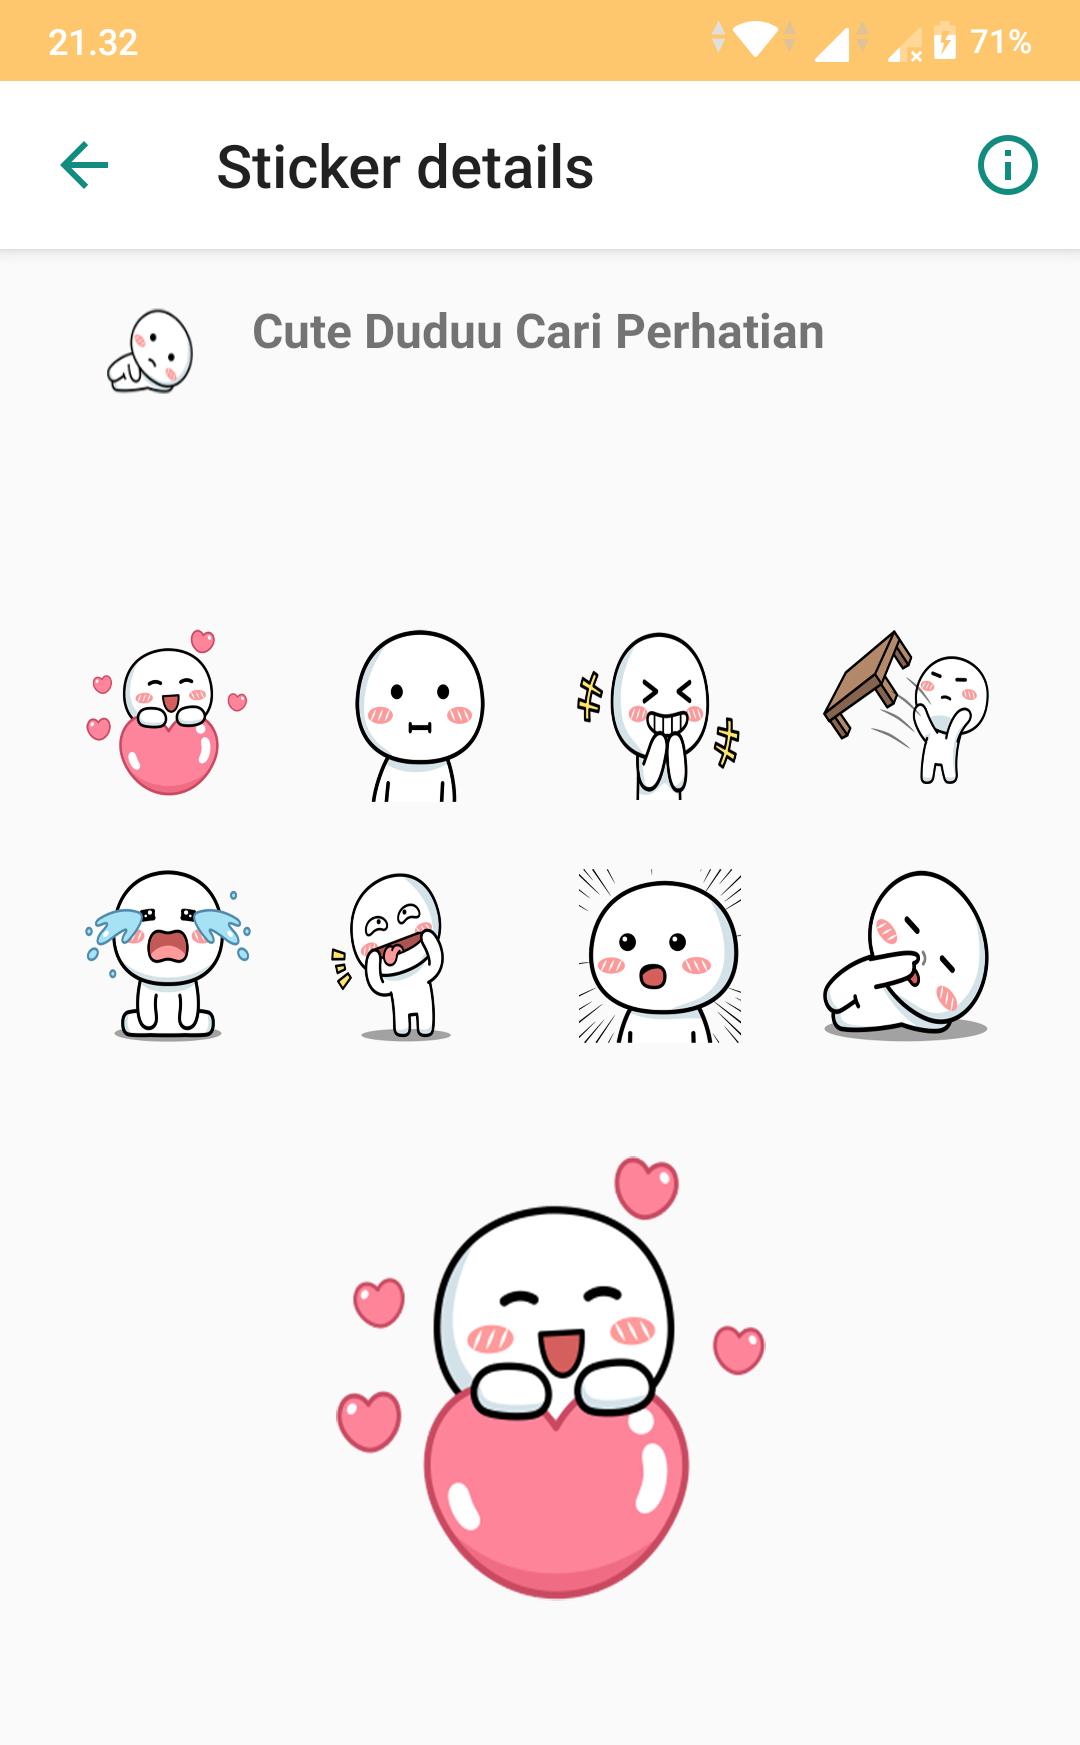 Cute Duduu Stickers For Android Apk Download